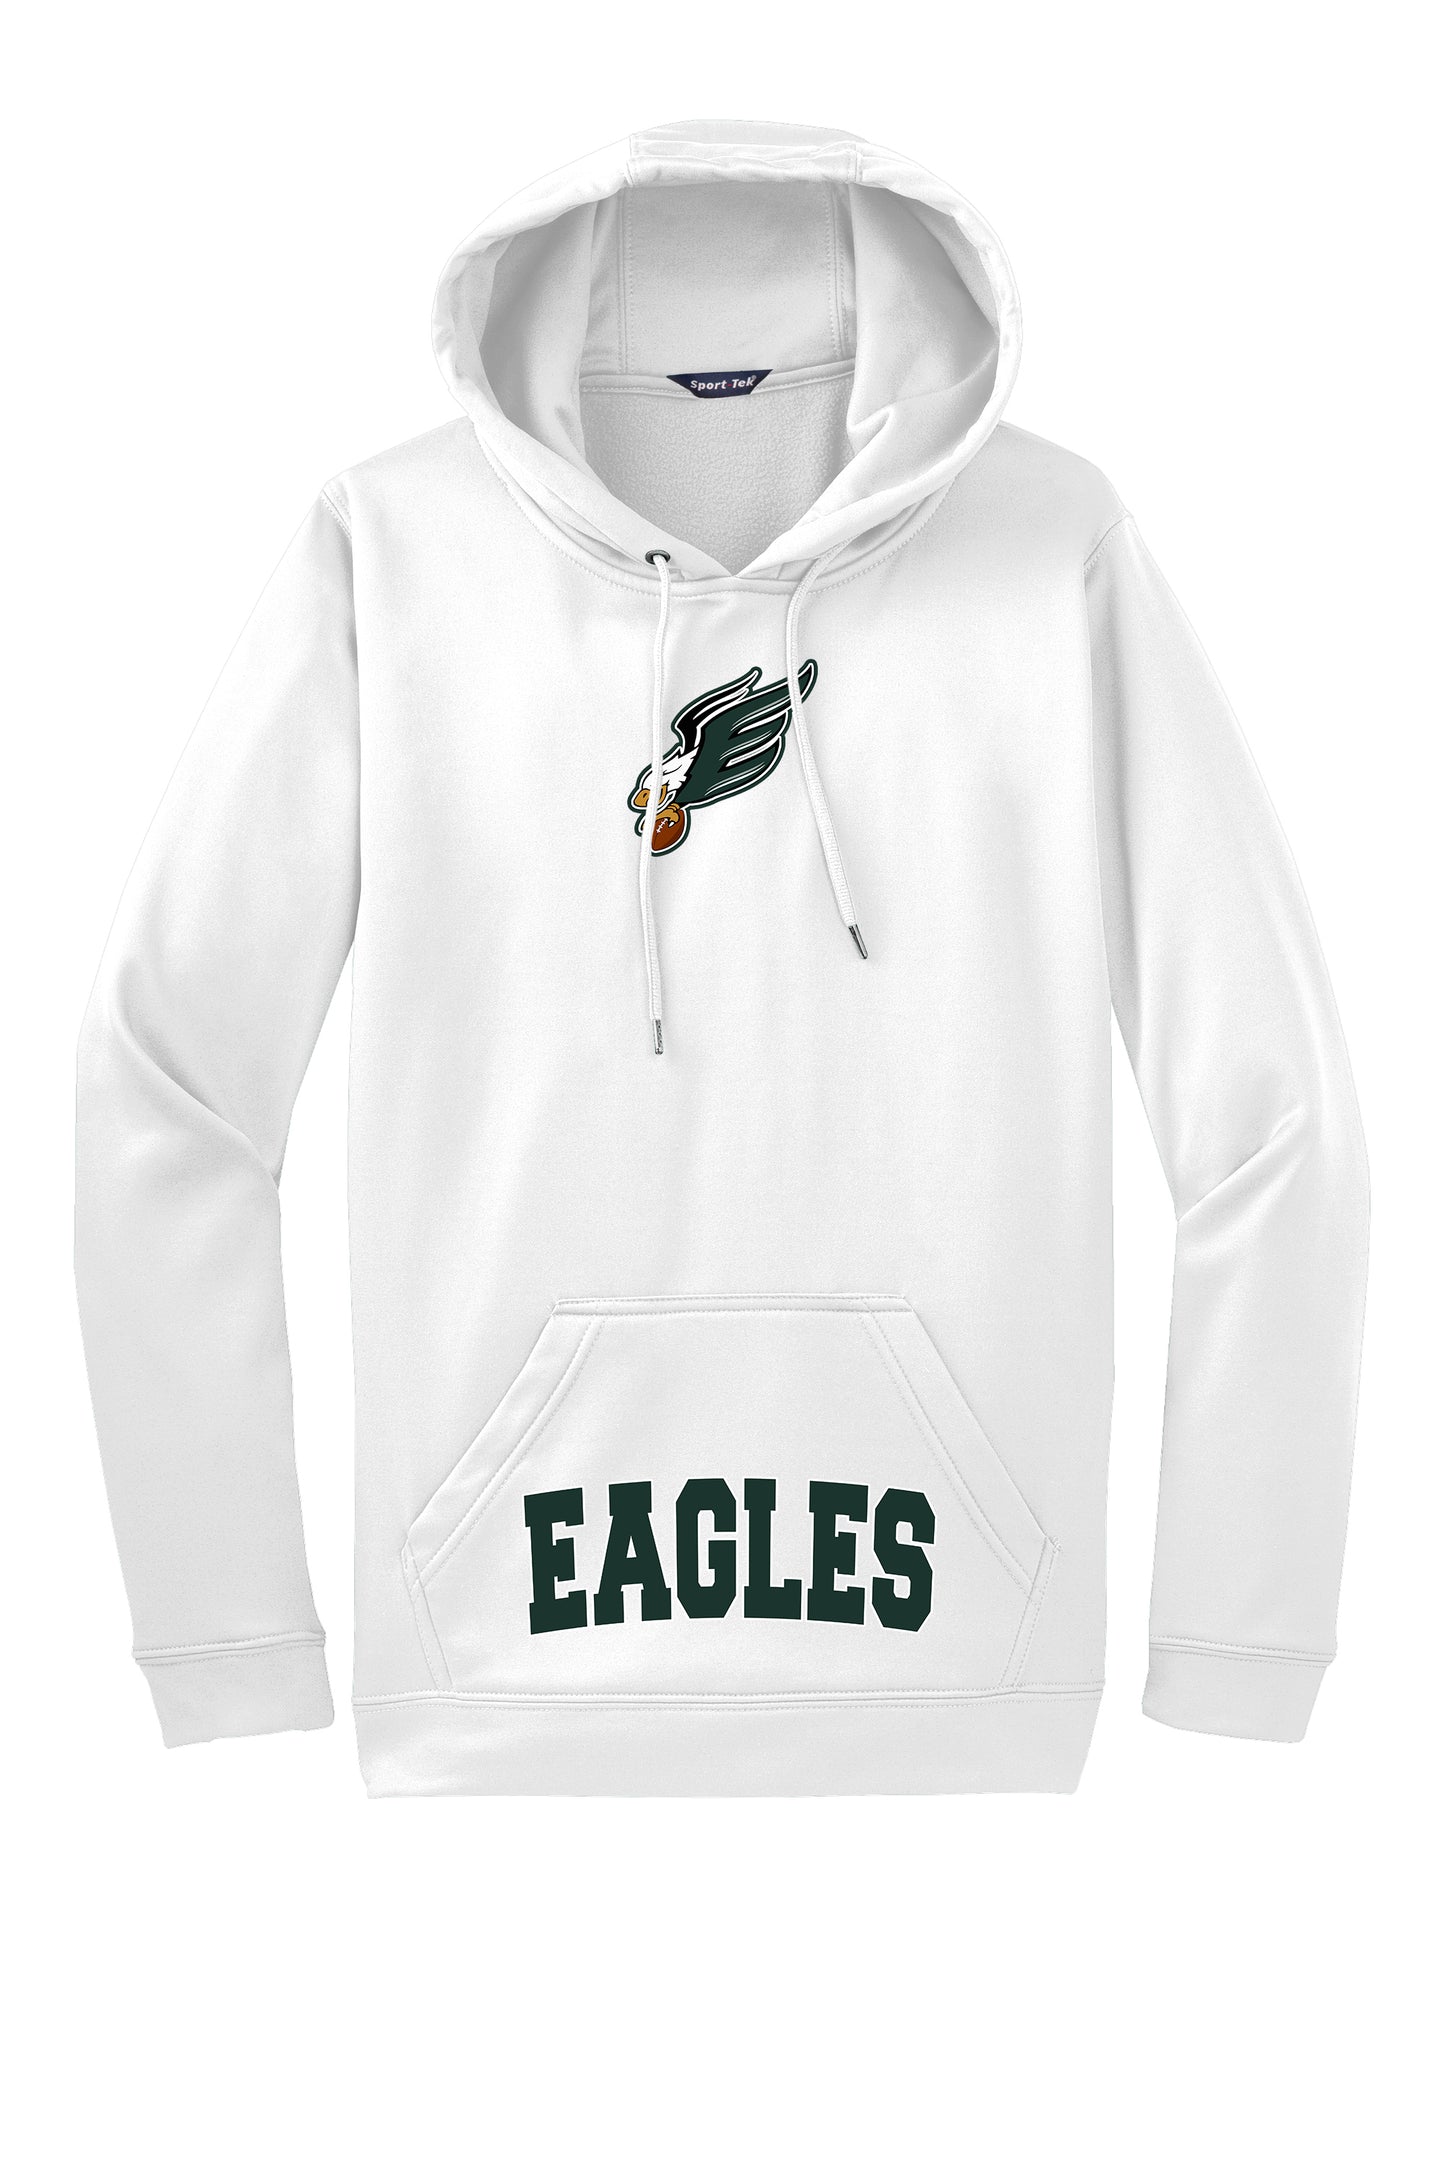 Enfield Eagles Football Adult Fleece Hoodie "Pocket" - F244 (color options available)